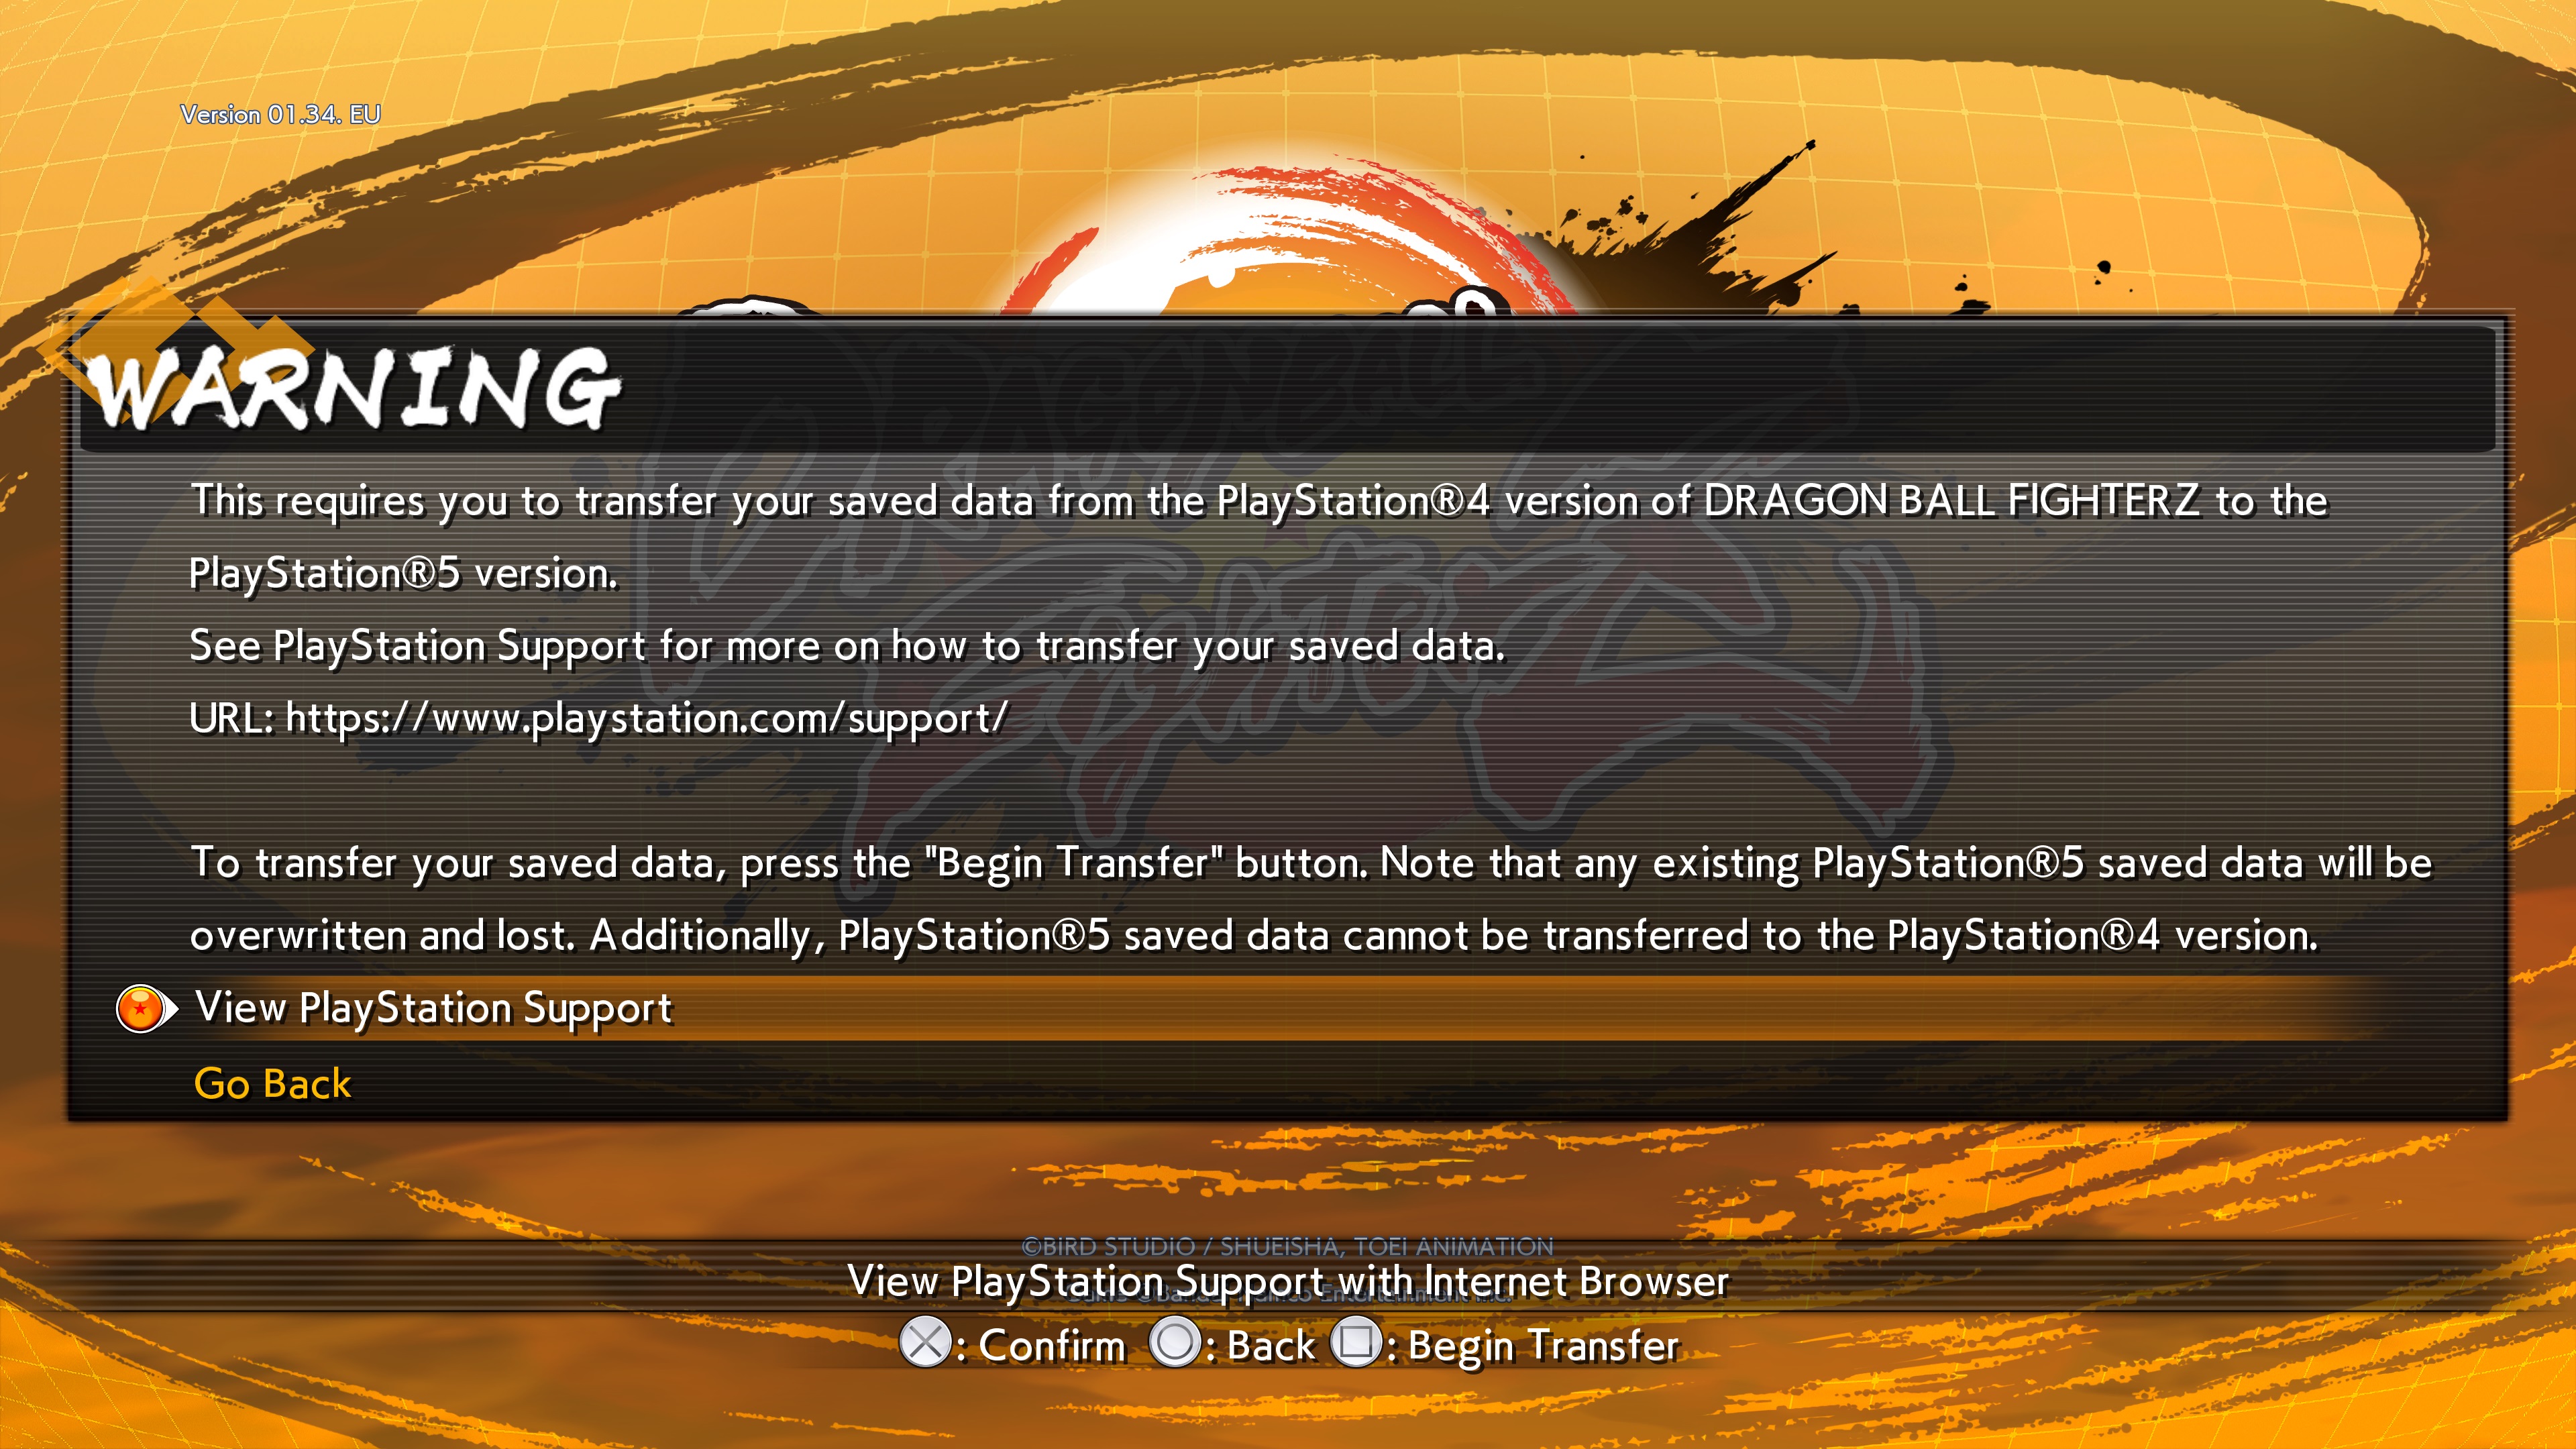 Warning message for transferring Playstation 4 saved data to the Playstation 5 version